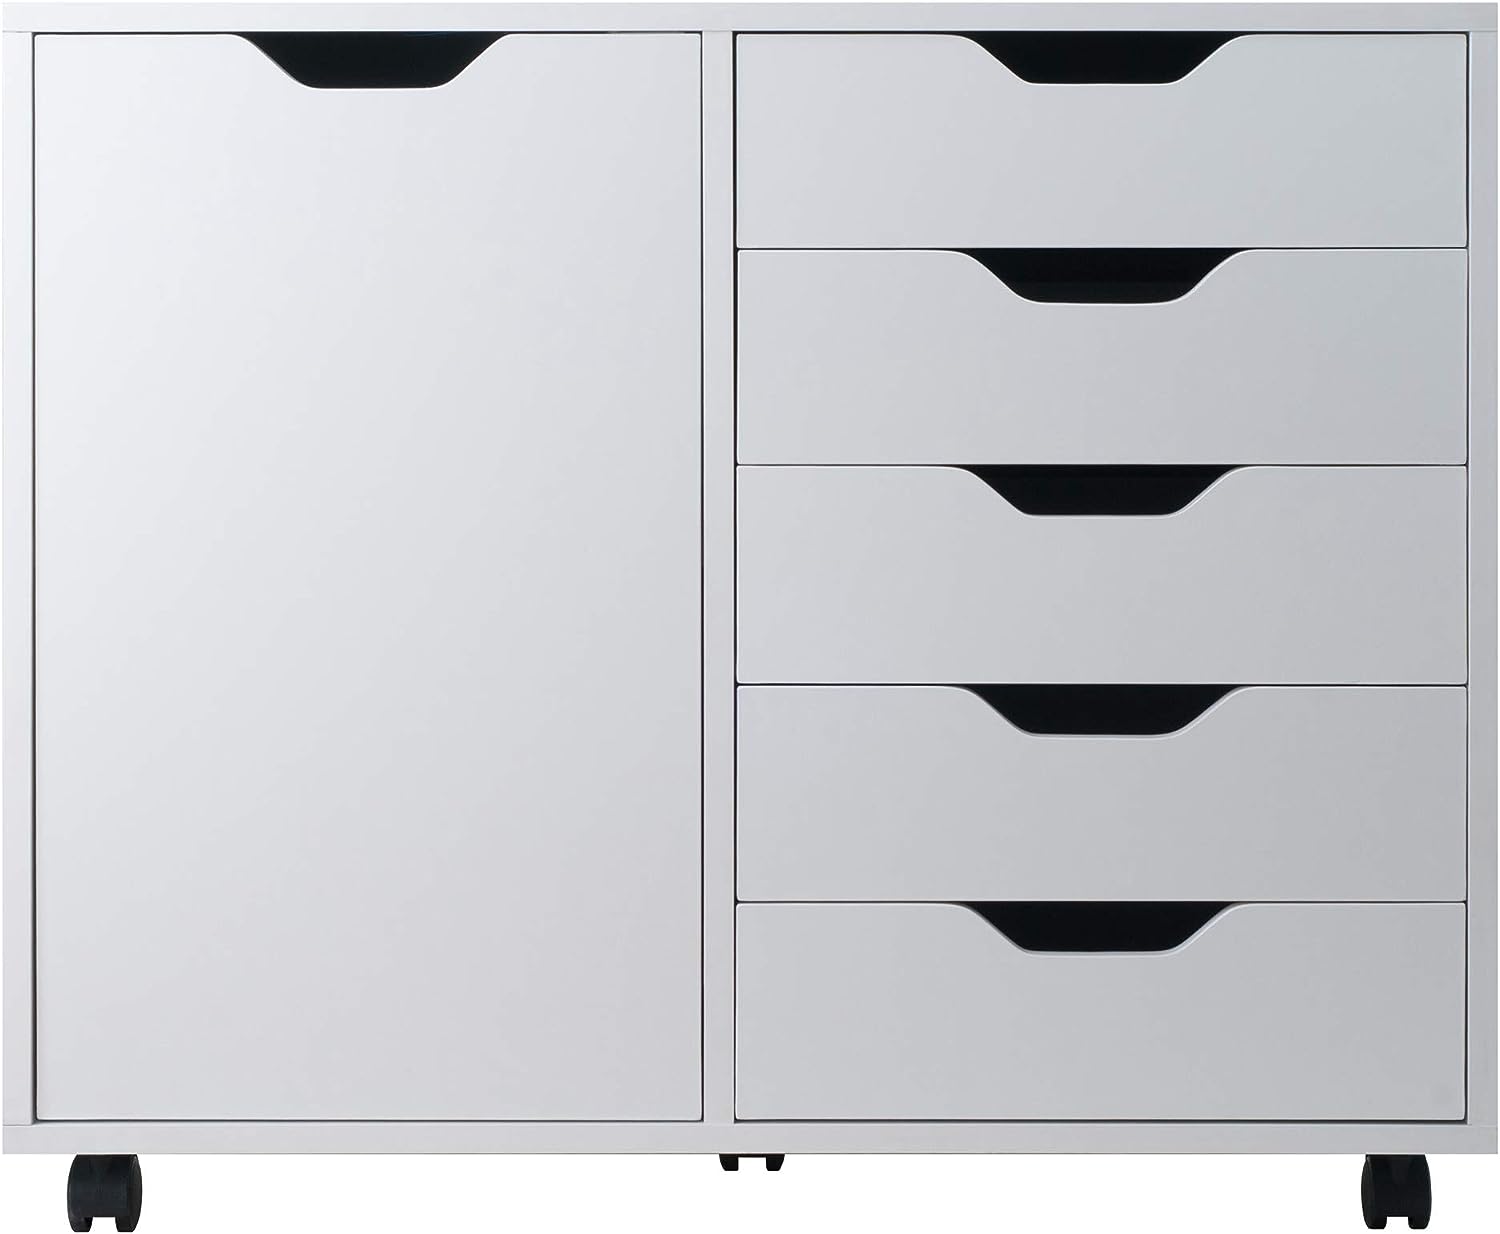 Winsome Halifax 7 Drawer Cabinet for Closet, White